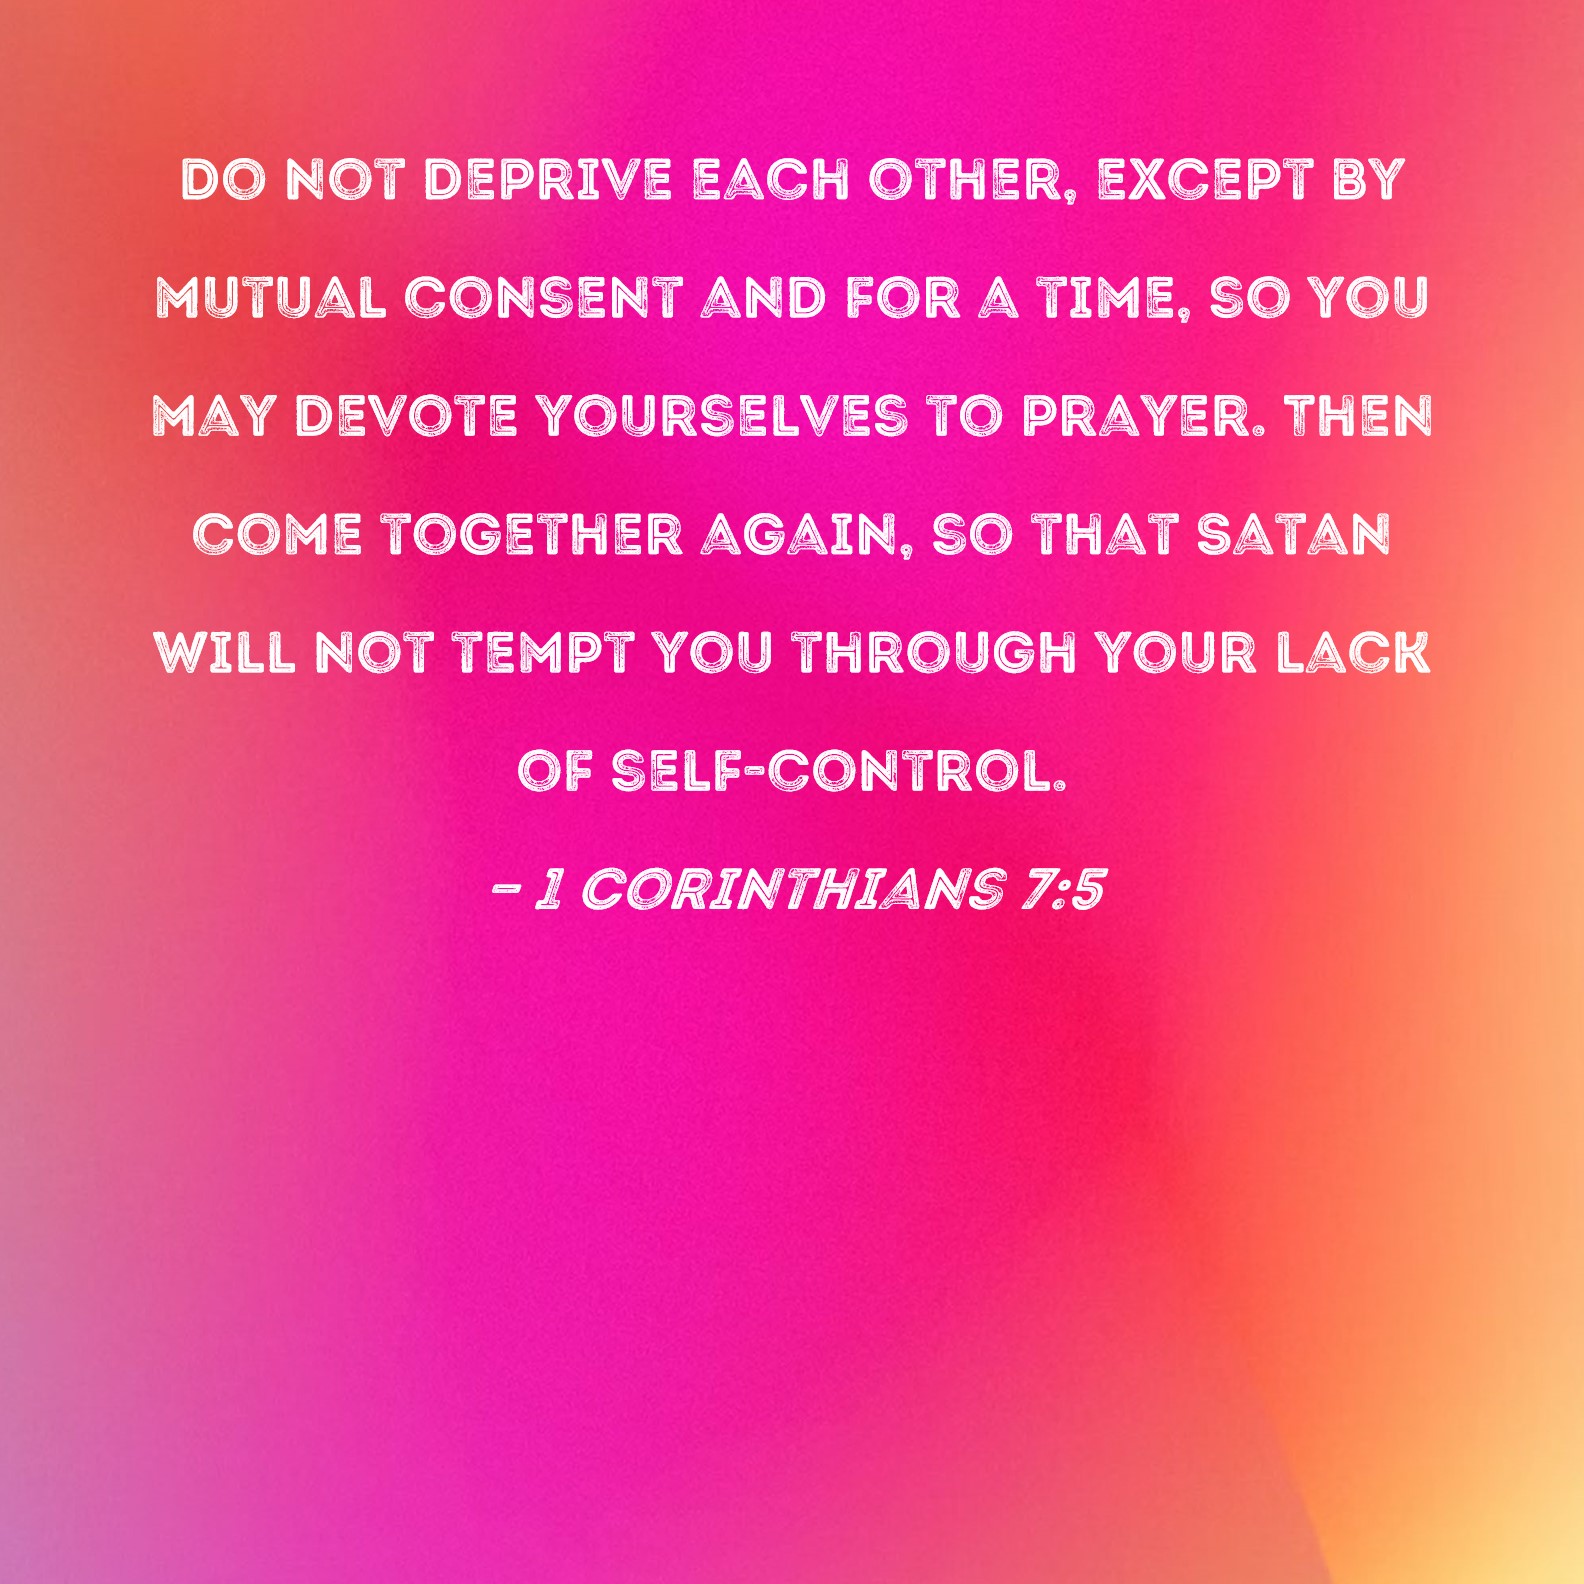 1 Corinthians 75 Do not deprive each other, except by mutual consent and for a time, so you may devote yourselves to prayer